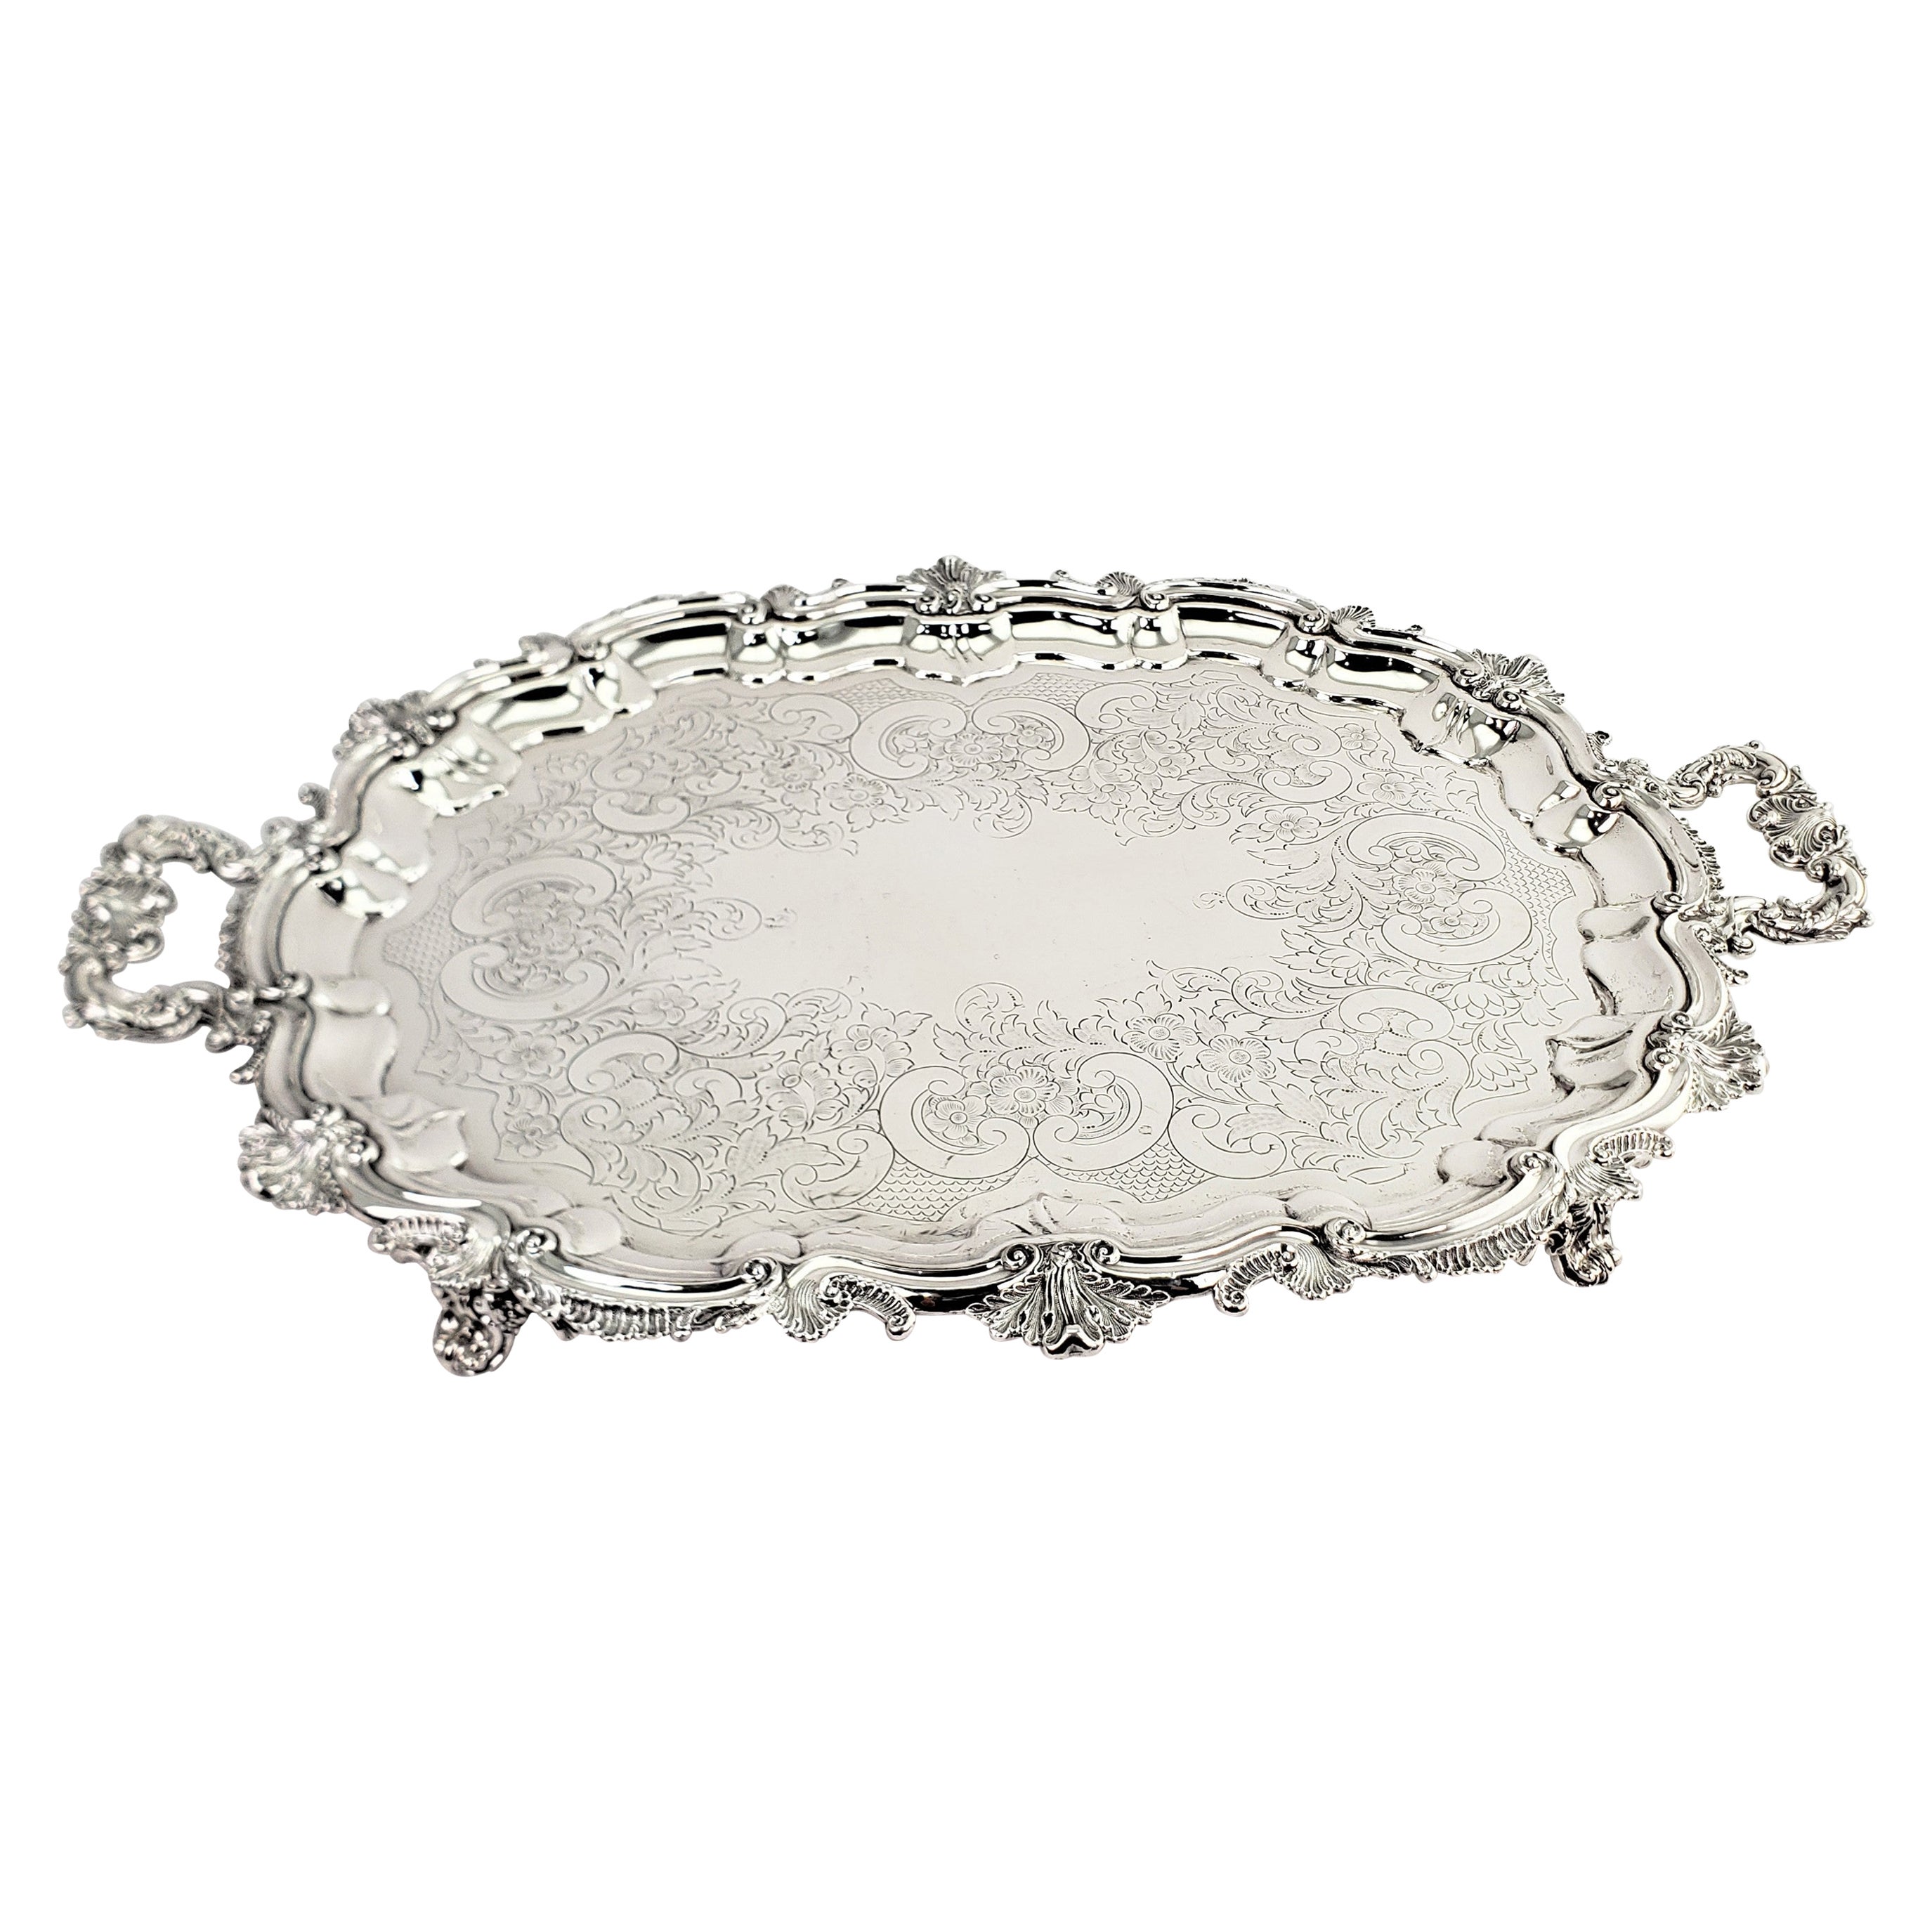 Large Antique English Silver Plated Serving Tray with Ornate Handles & Engraving